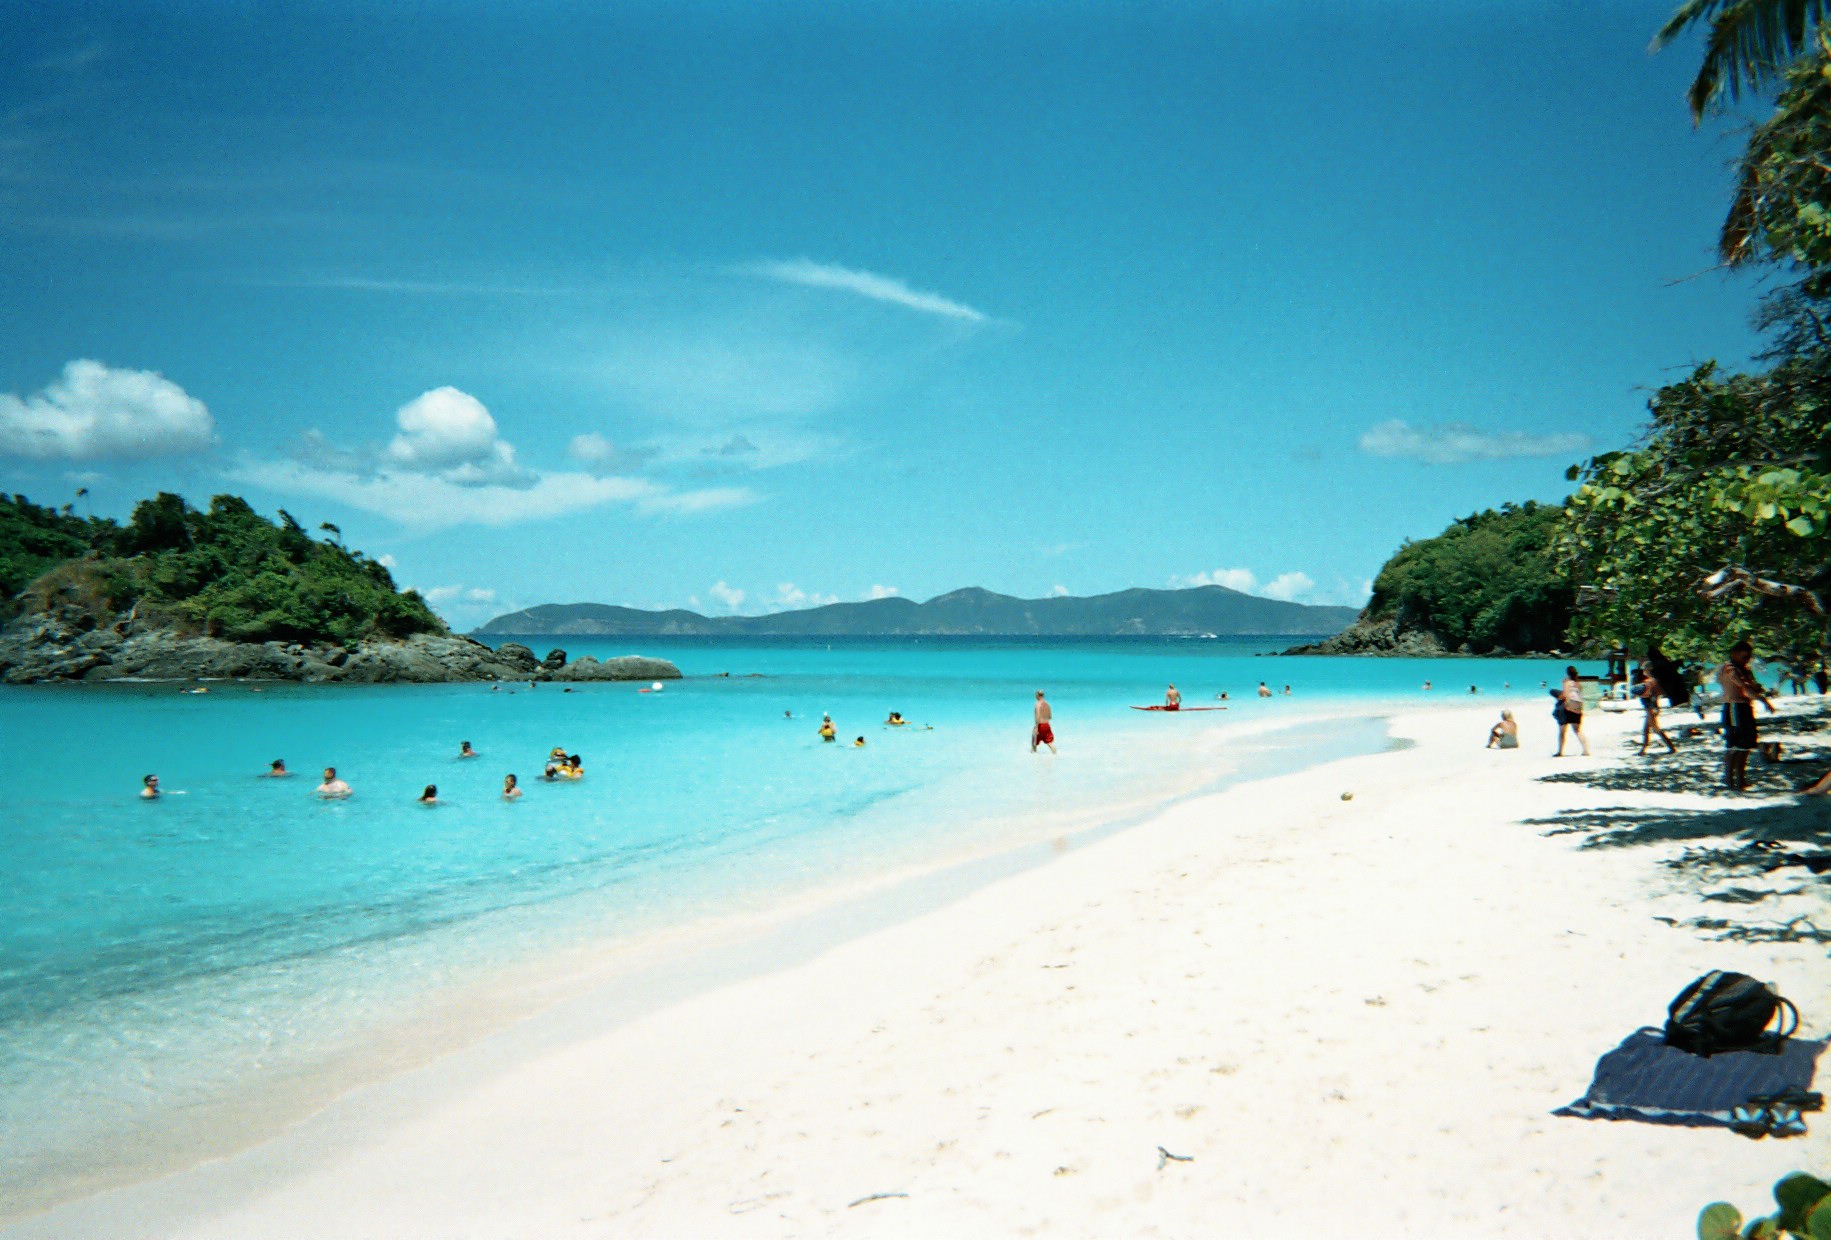 Trunk Bay, St John. The underwater snorkel trail is just infront of the little island on the left.